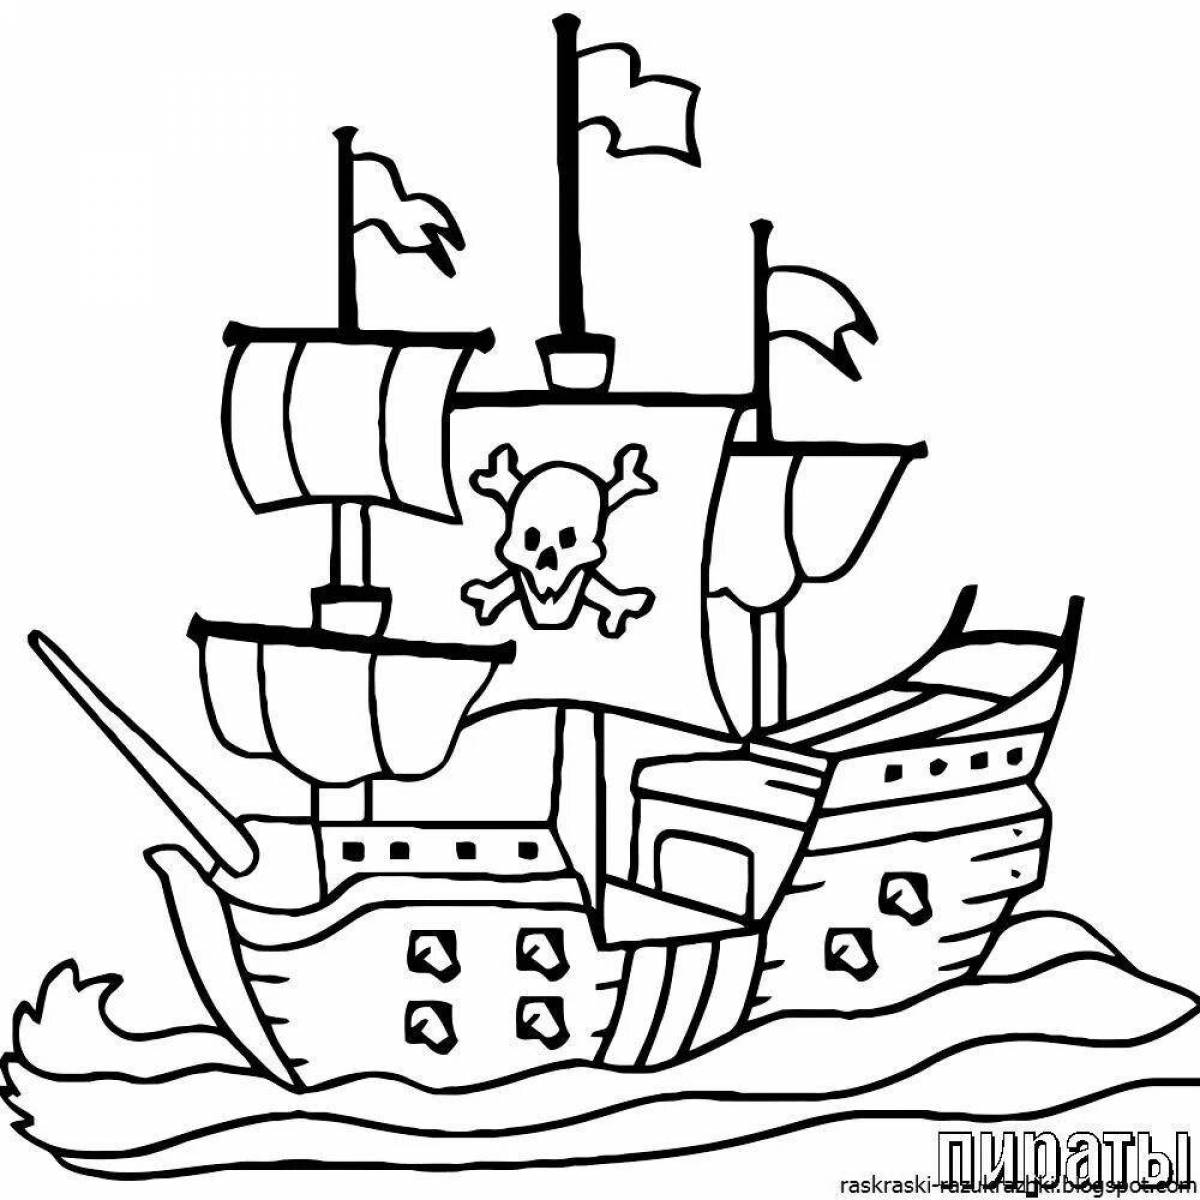 Sailboat coloring book for kids